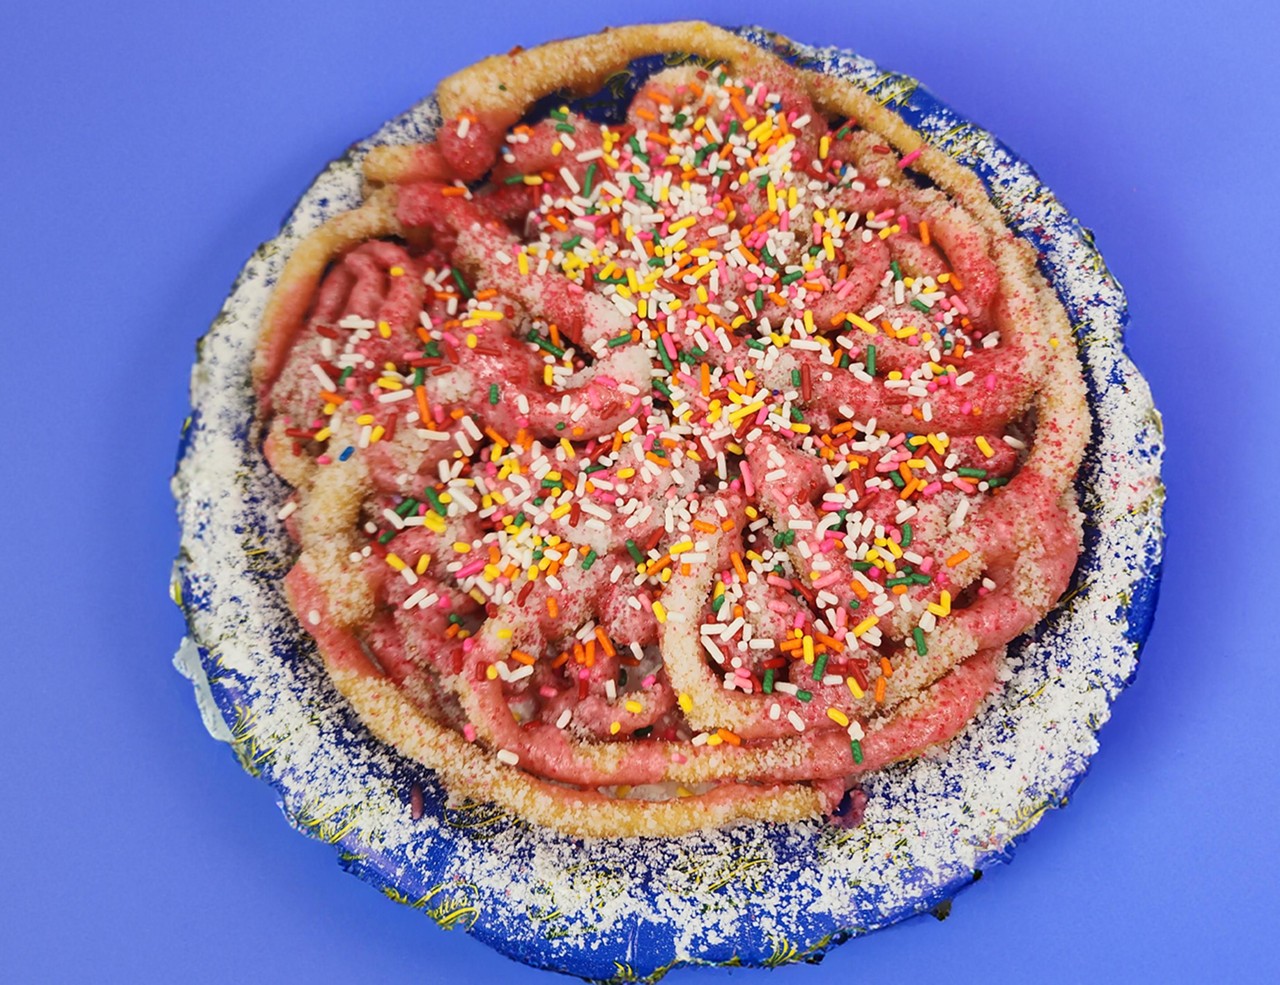 BARBIE FUNNEL CAKE
Funnel Cake with Powdered Sugar, Barbie Pink Icing and 2 kinds of Sprinkles.
Paulette's Food Service